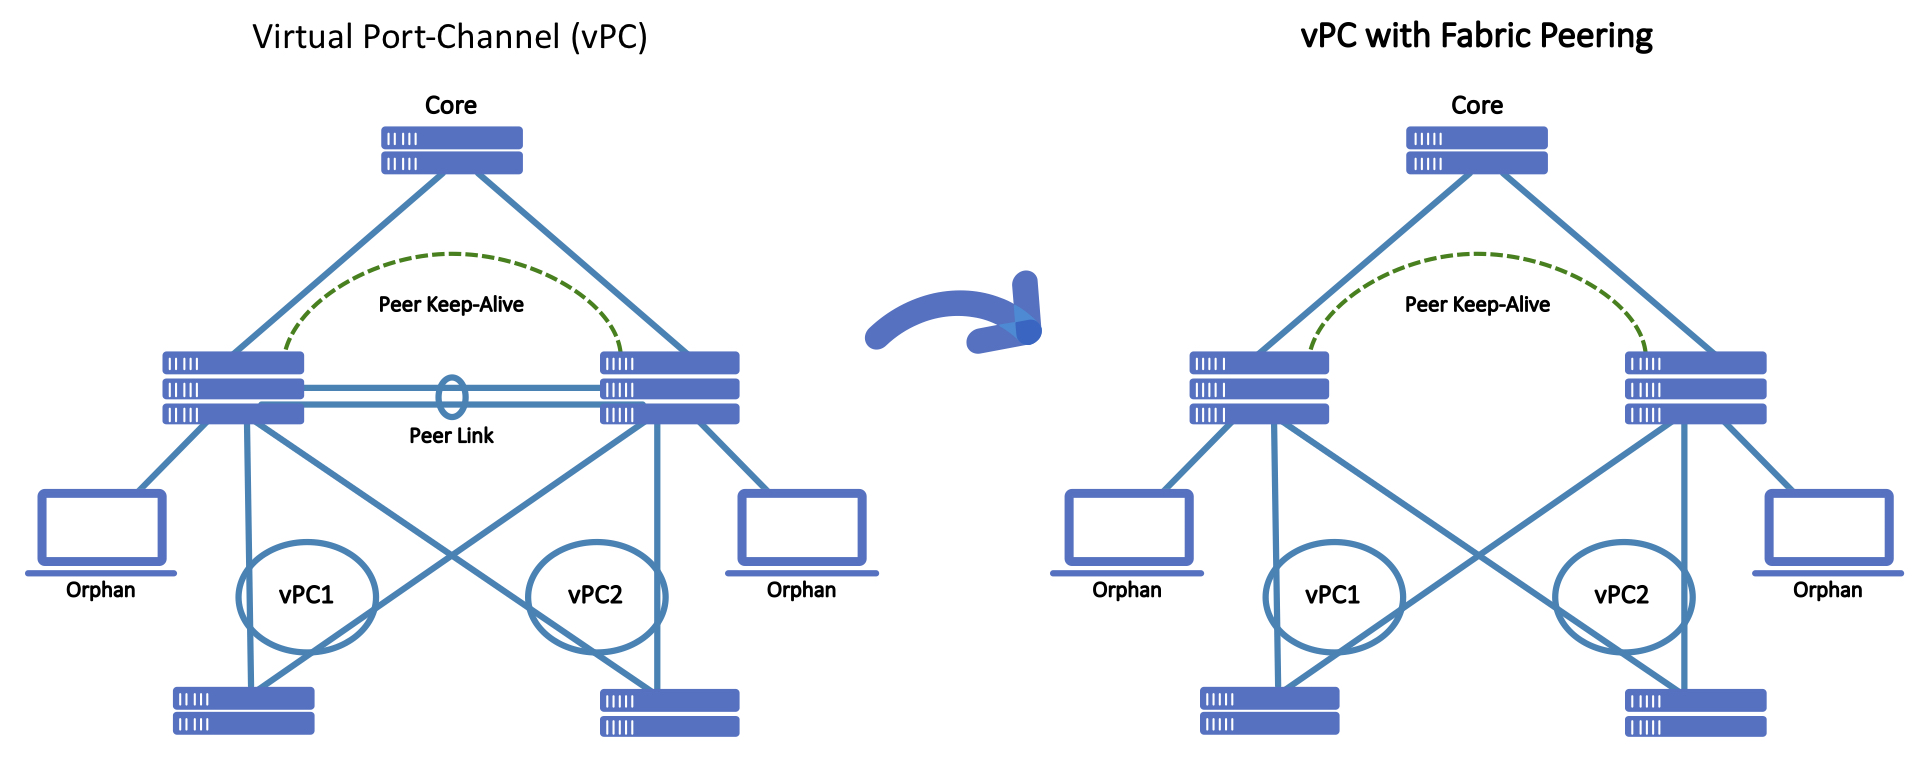 vPC and vPC with Fabric Peering